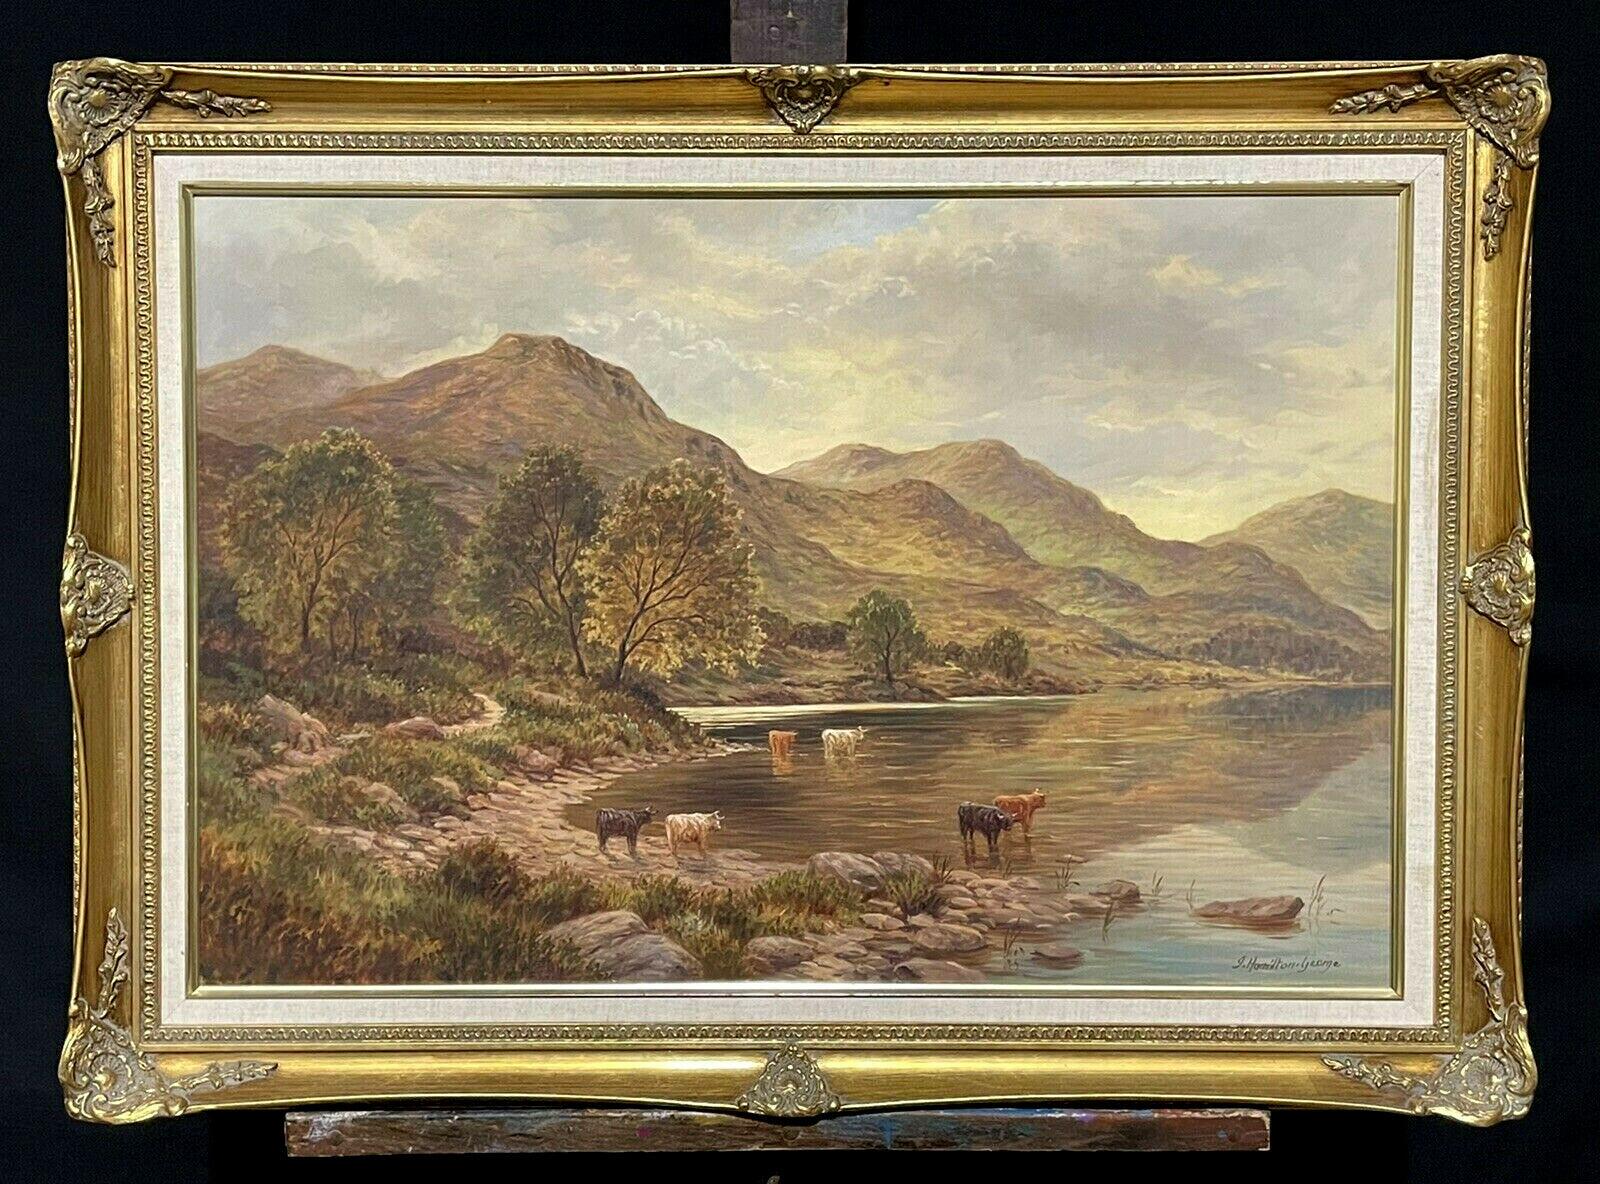 SIGNED SCOTTISH HIGHLANDS LOCH SCENE & CATTLE OIL PAINTING - J. HAMILTON GEORGE - Painting by J. Hamilton George